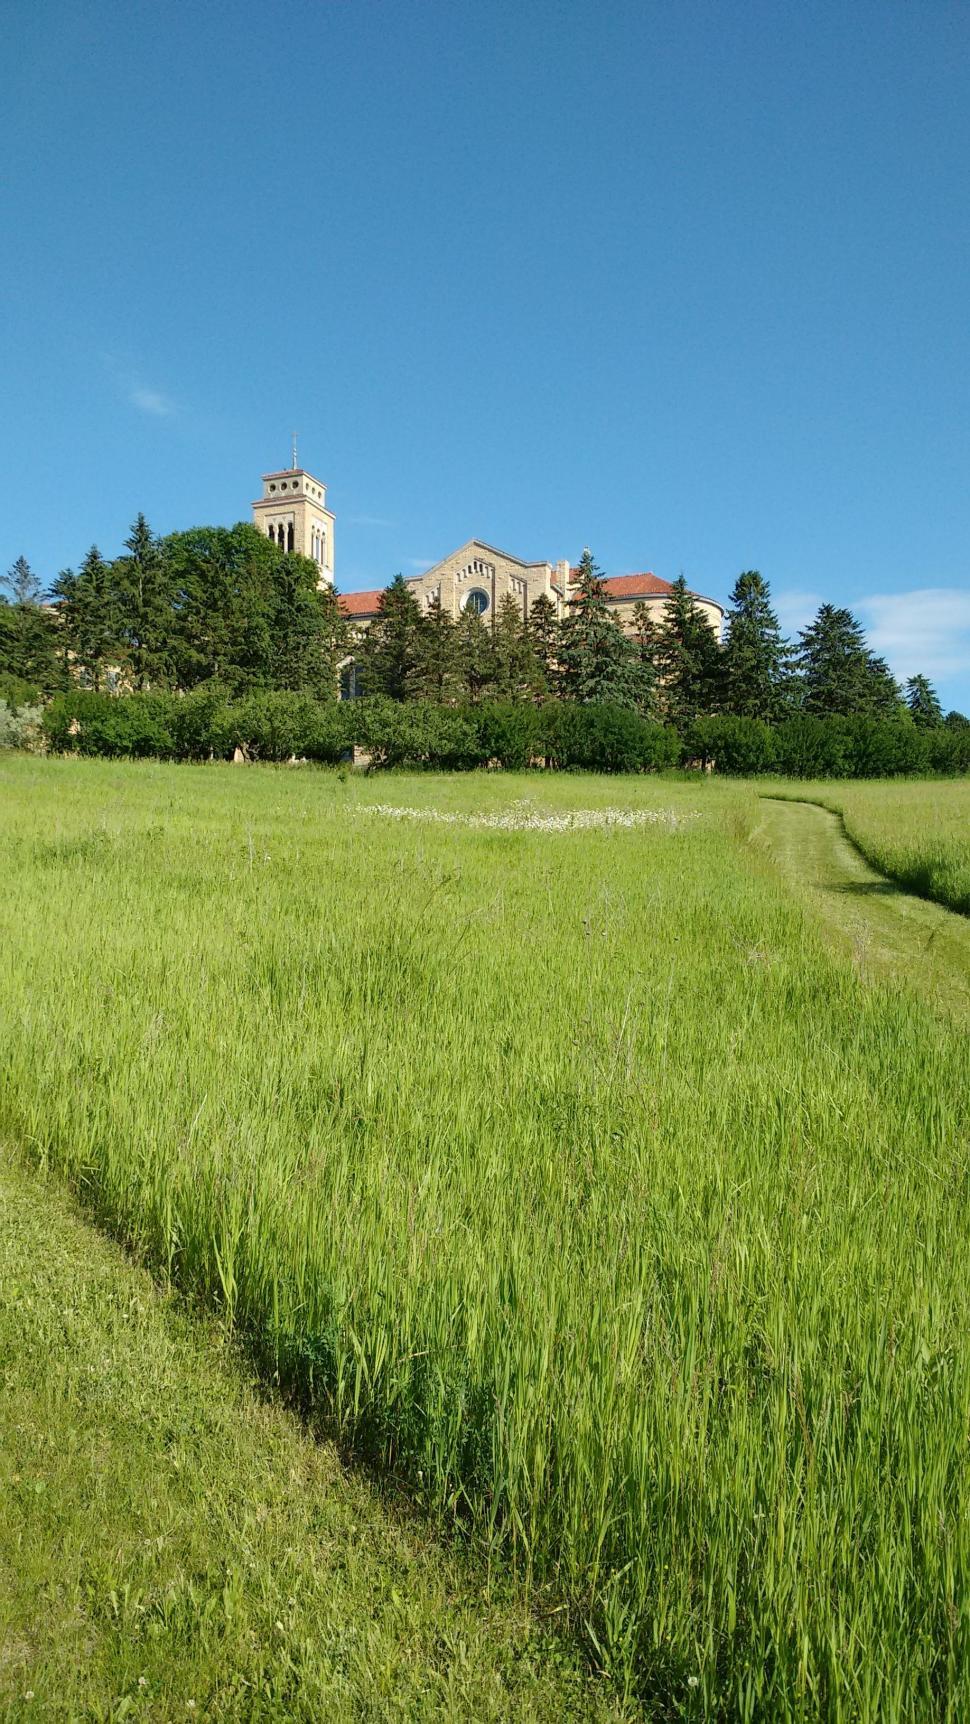 Free Image of Church Building and Grass 